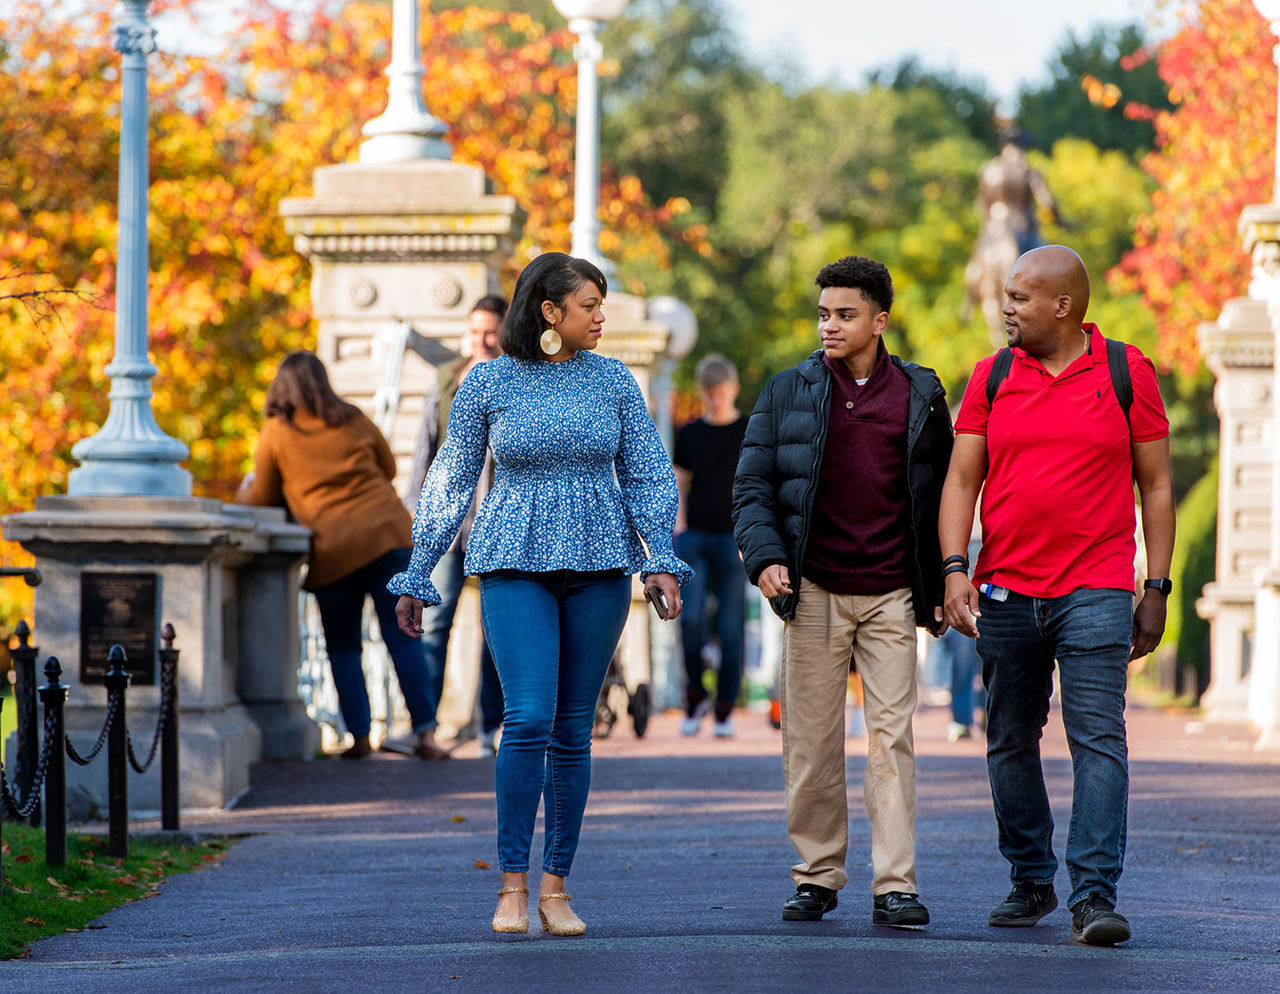 Latino parents and their teenaged son in Boston Public Garden, with autumn trees in the background.